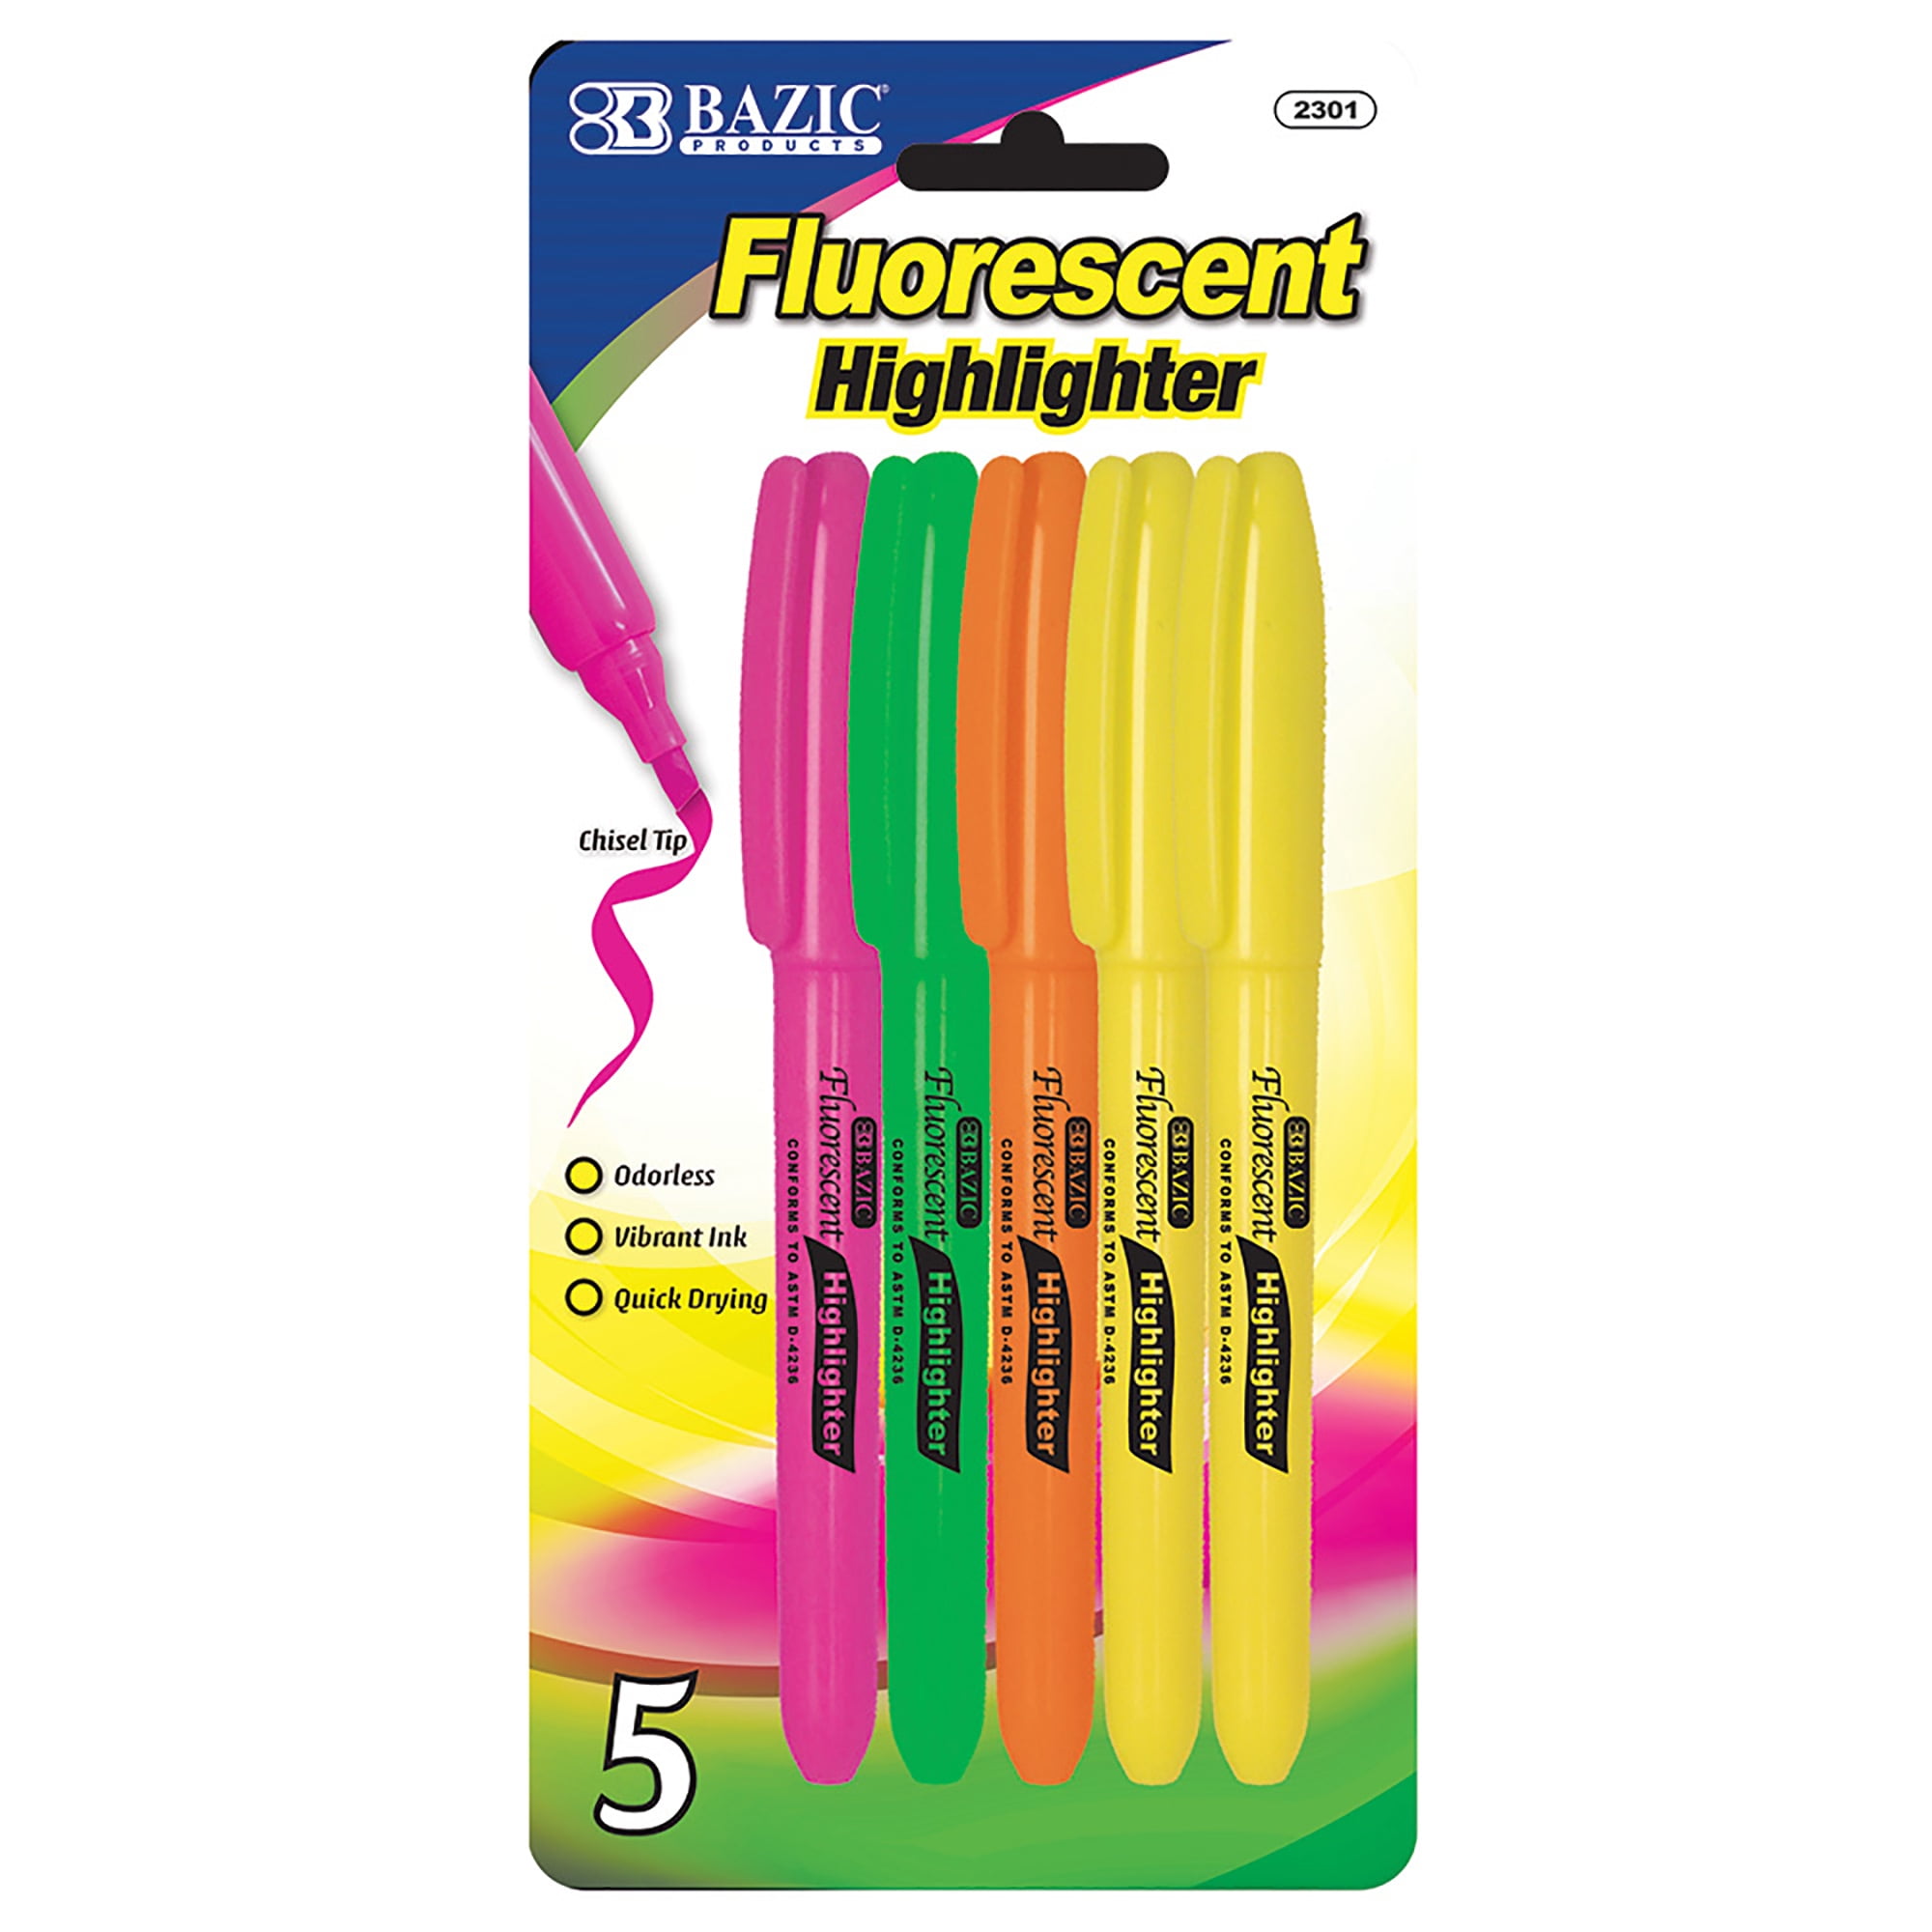 Bazic Neon Highlighter Assorted Color Pen Style Chisel Tip Broad Fine